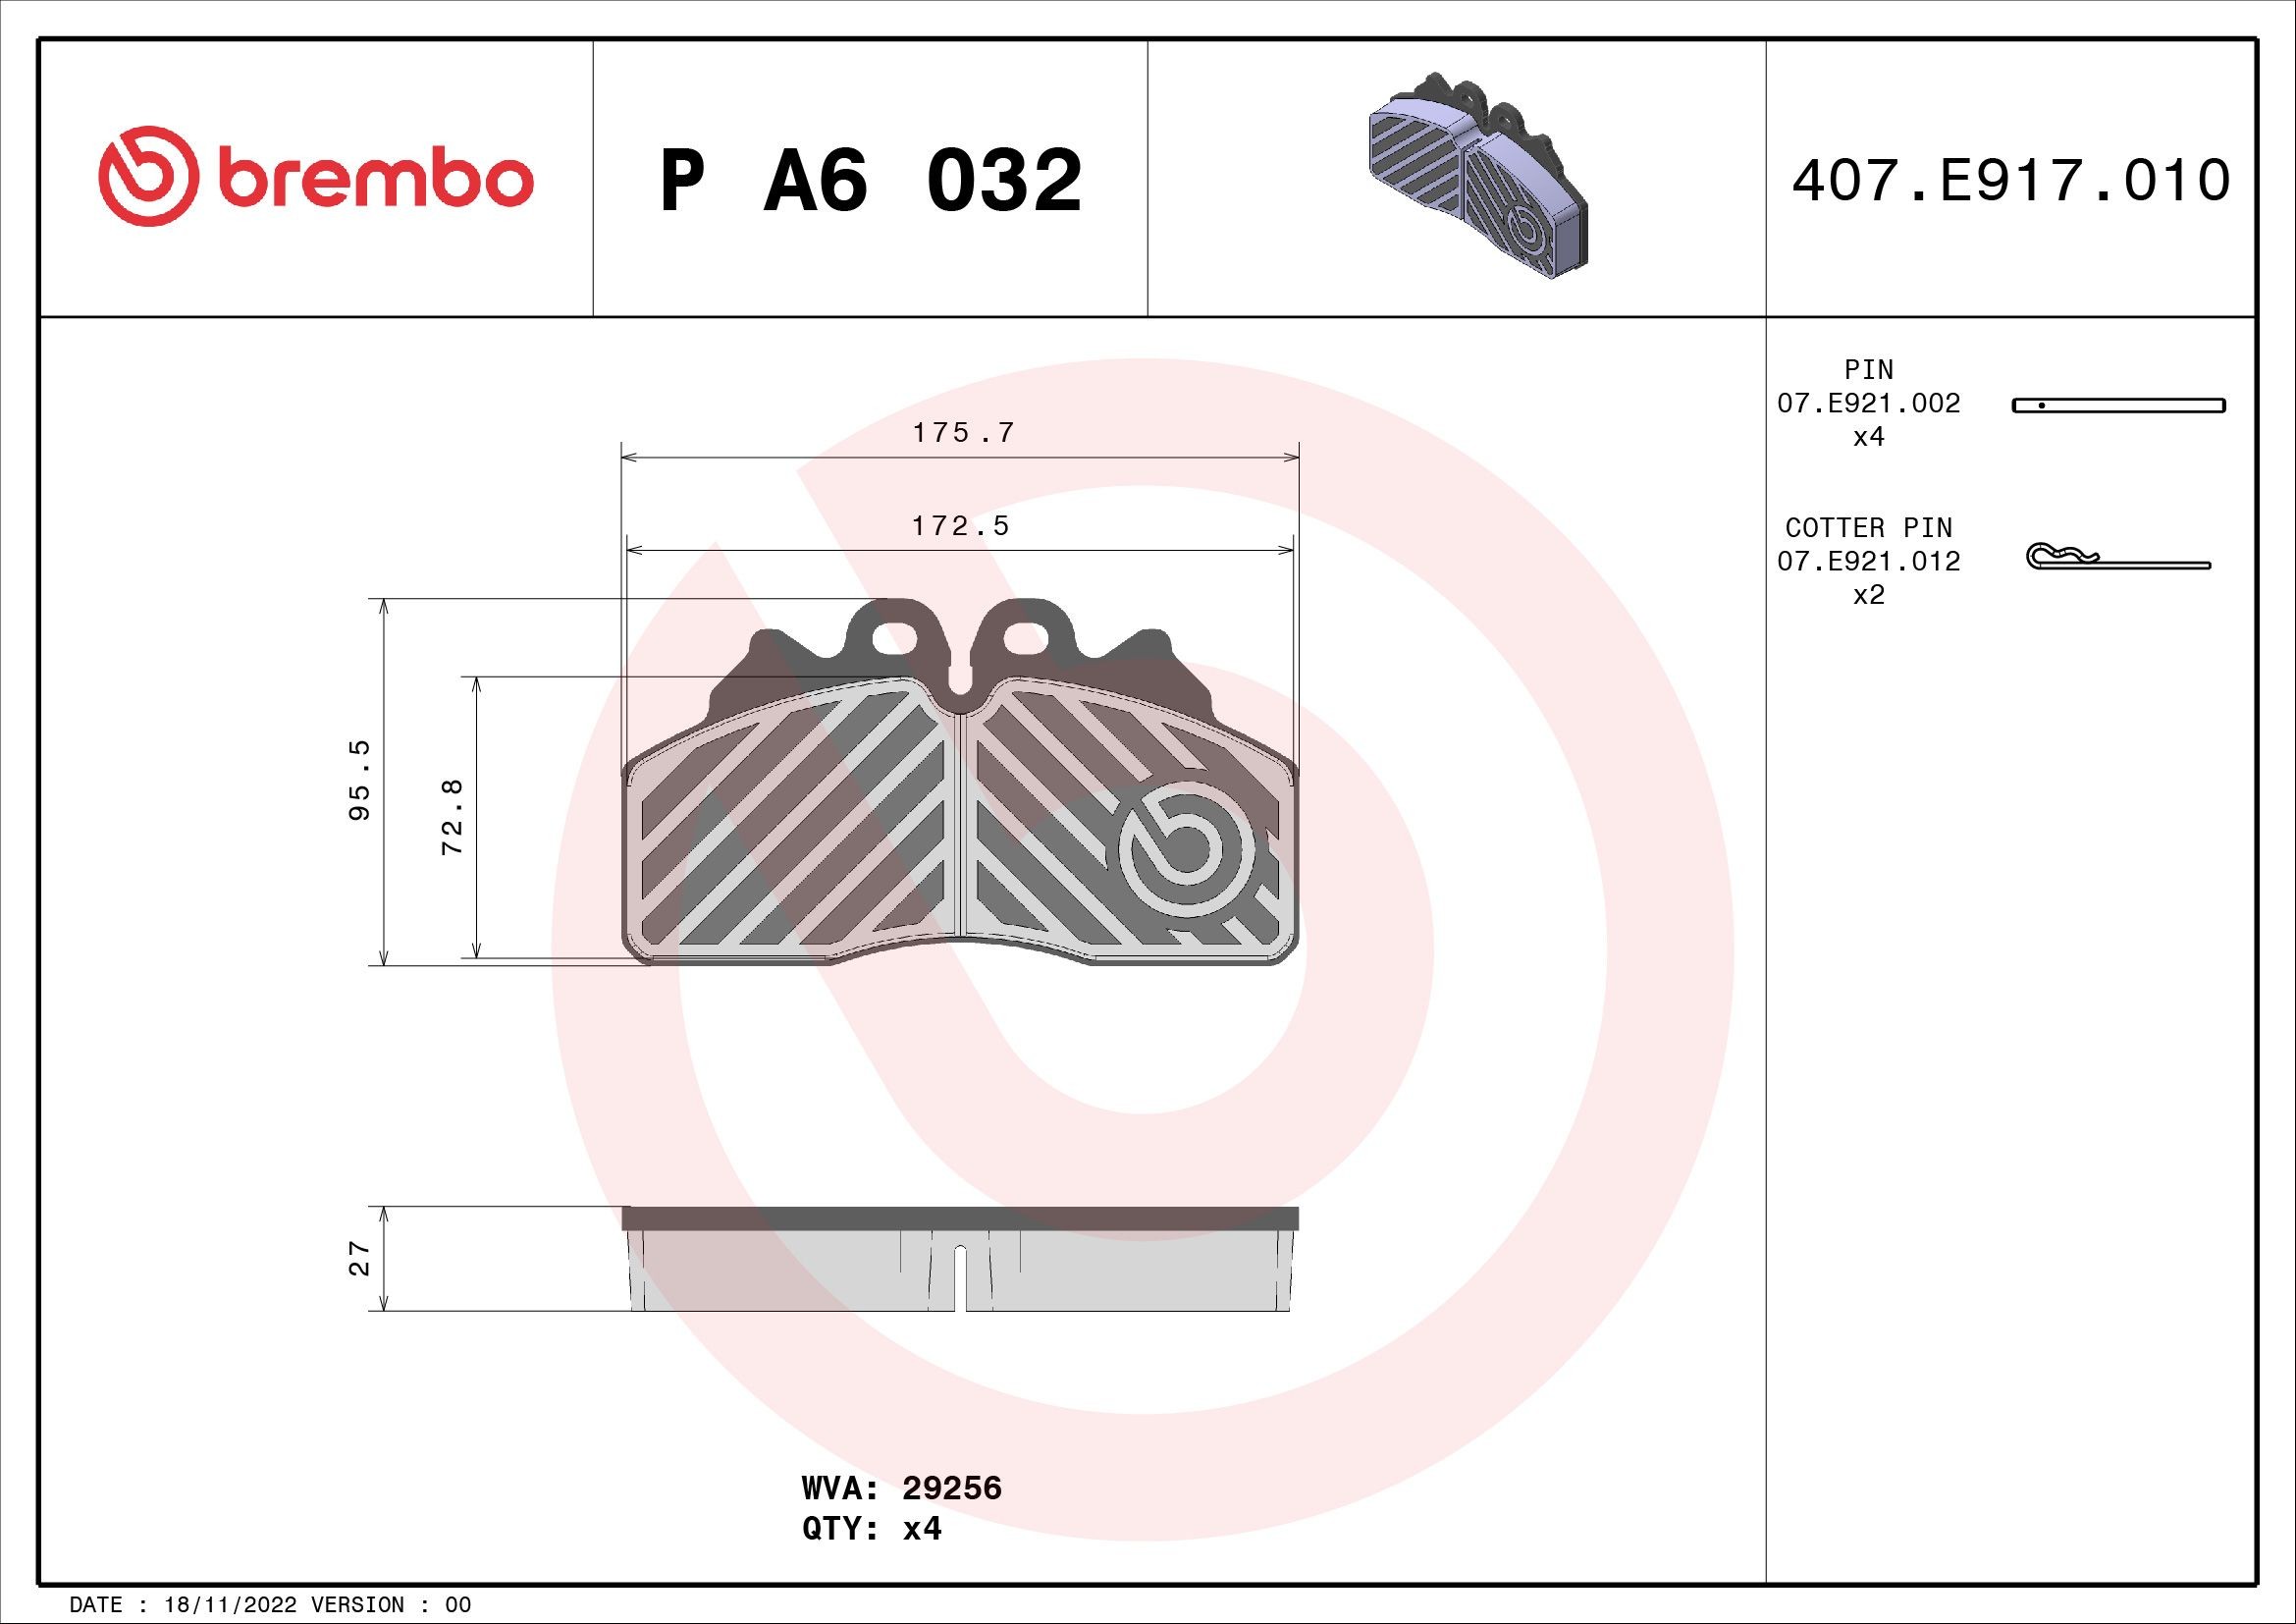 BREMBO prepared for wear indicator, with accessories Height: 96mm, Width: 176mm, Thickness: 27mm Brake pads P A6 032 buy